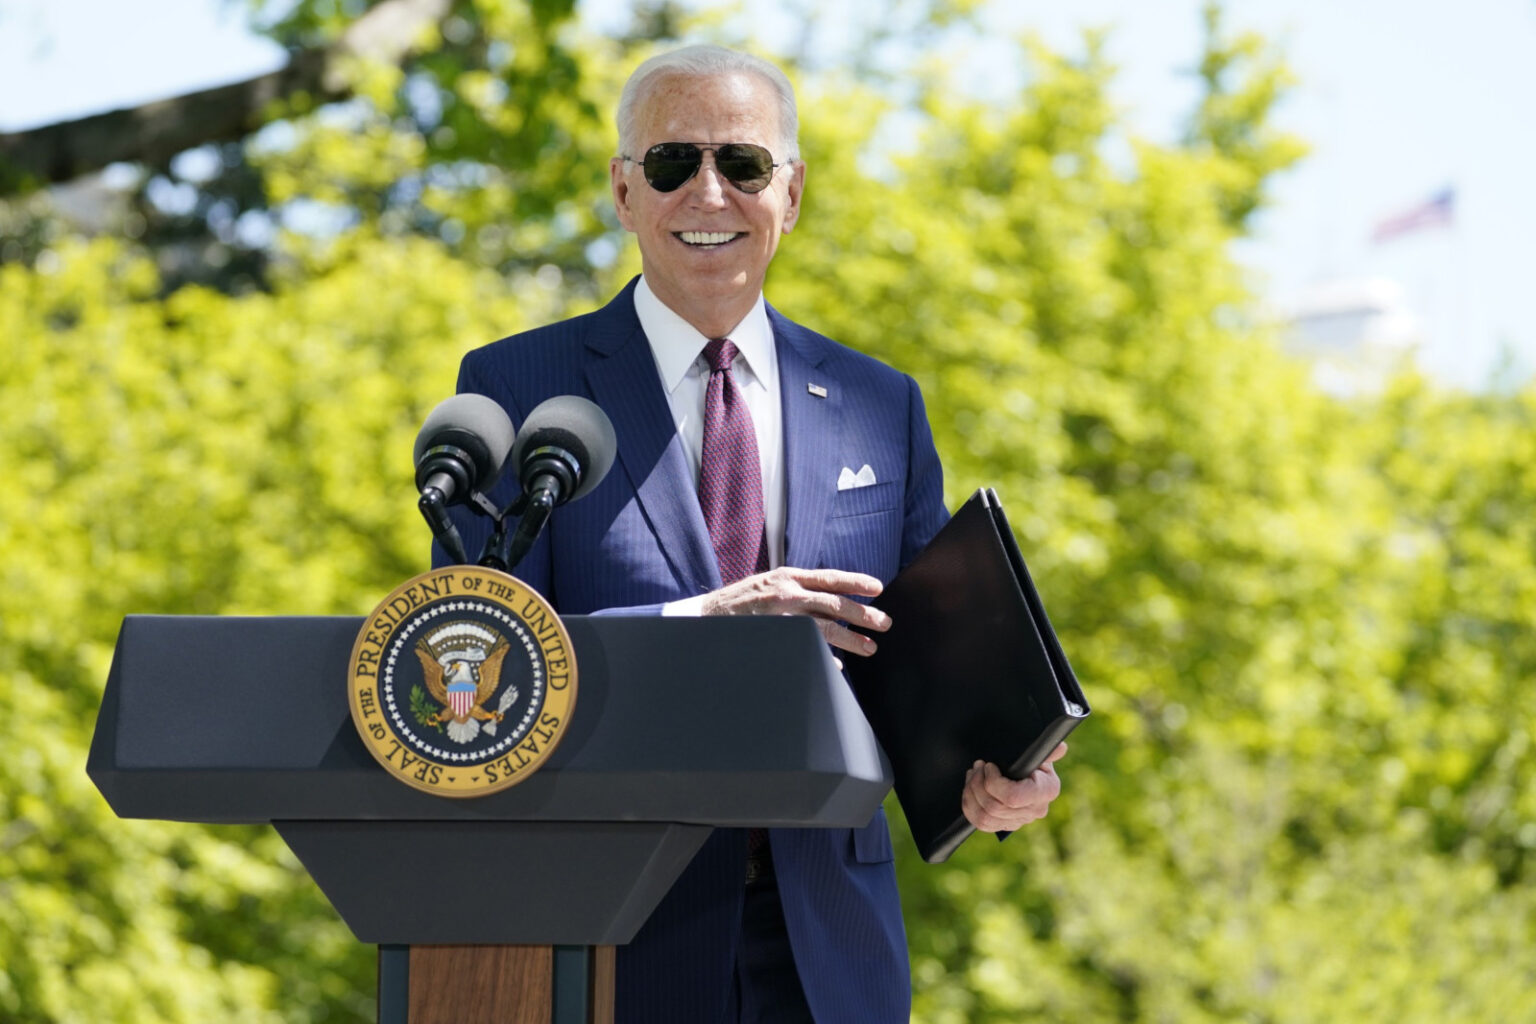 Just how rich can a sitting president be and become? Let's take a look into Joe Biden's net worth.